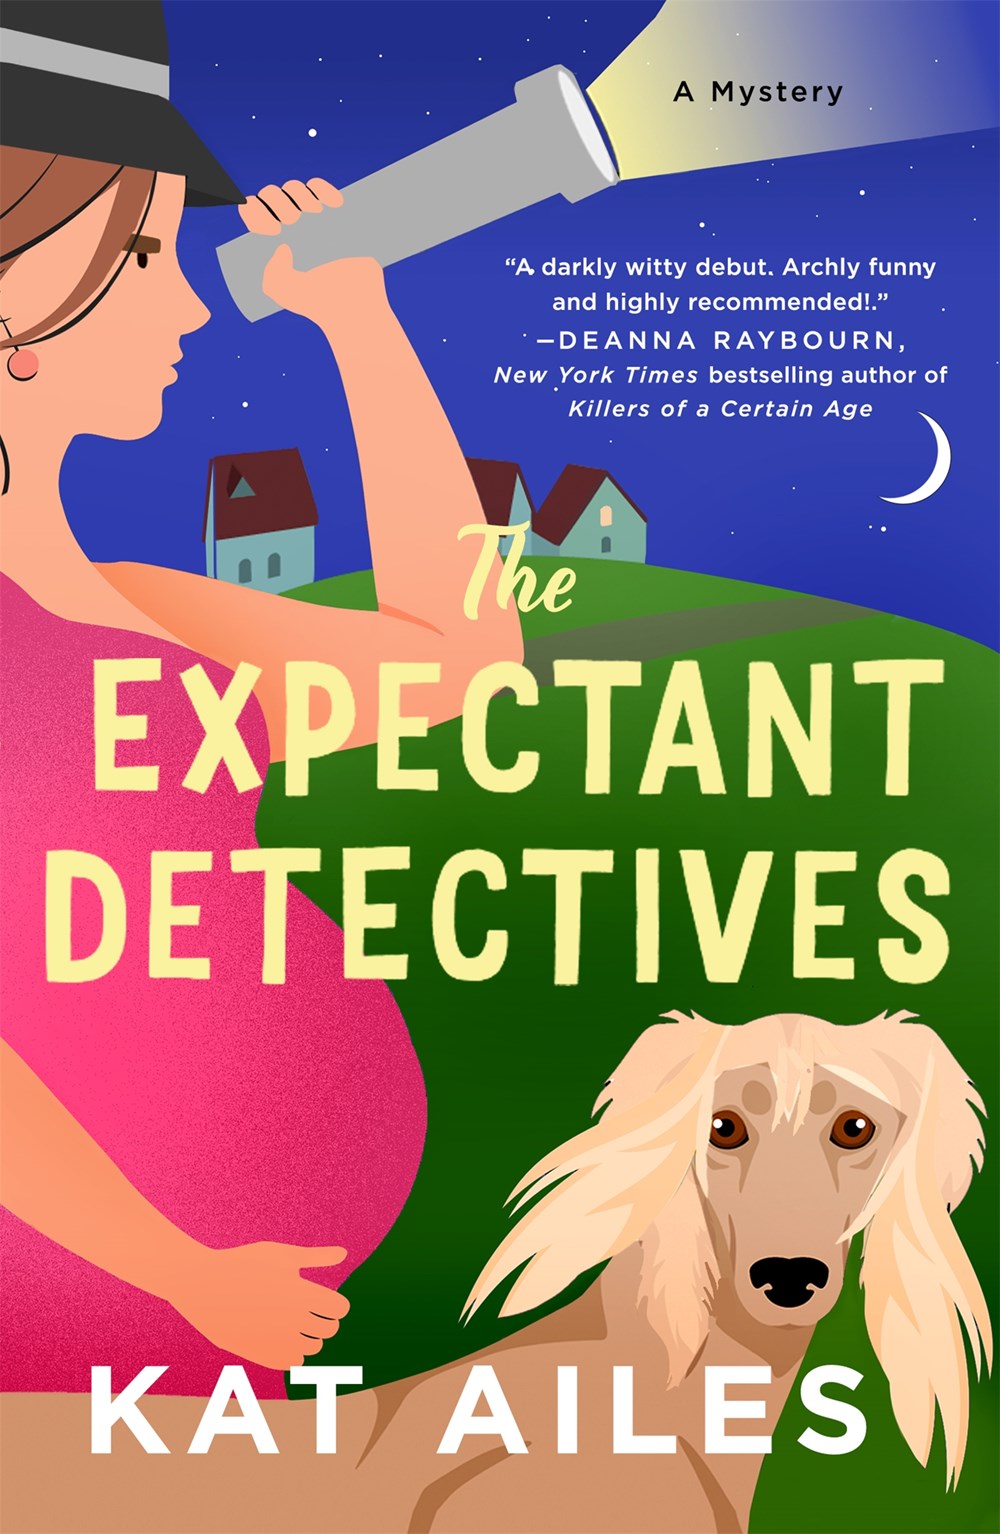 The Expectant Detectives : A Novel (Paperback Edition)